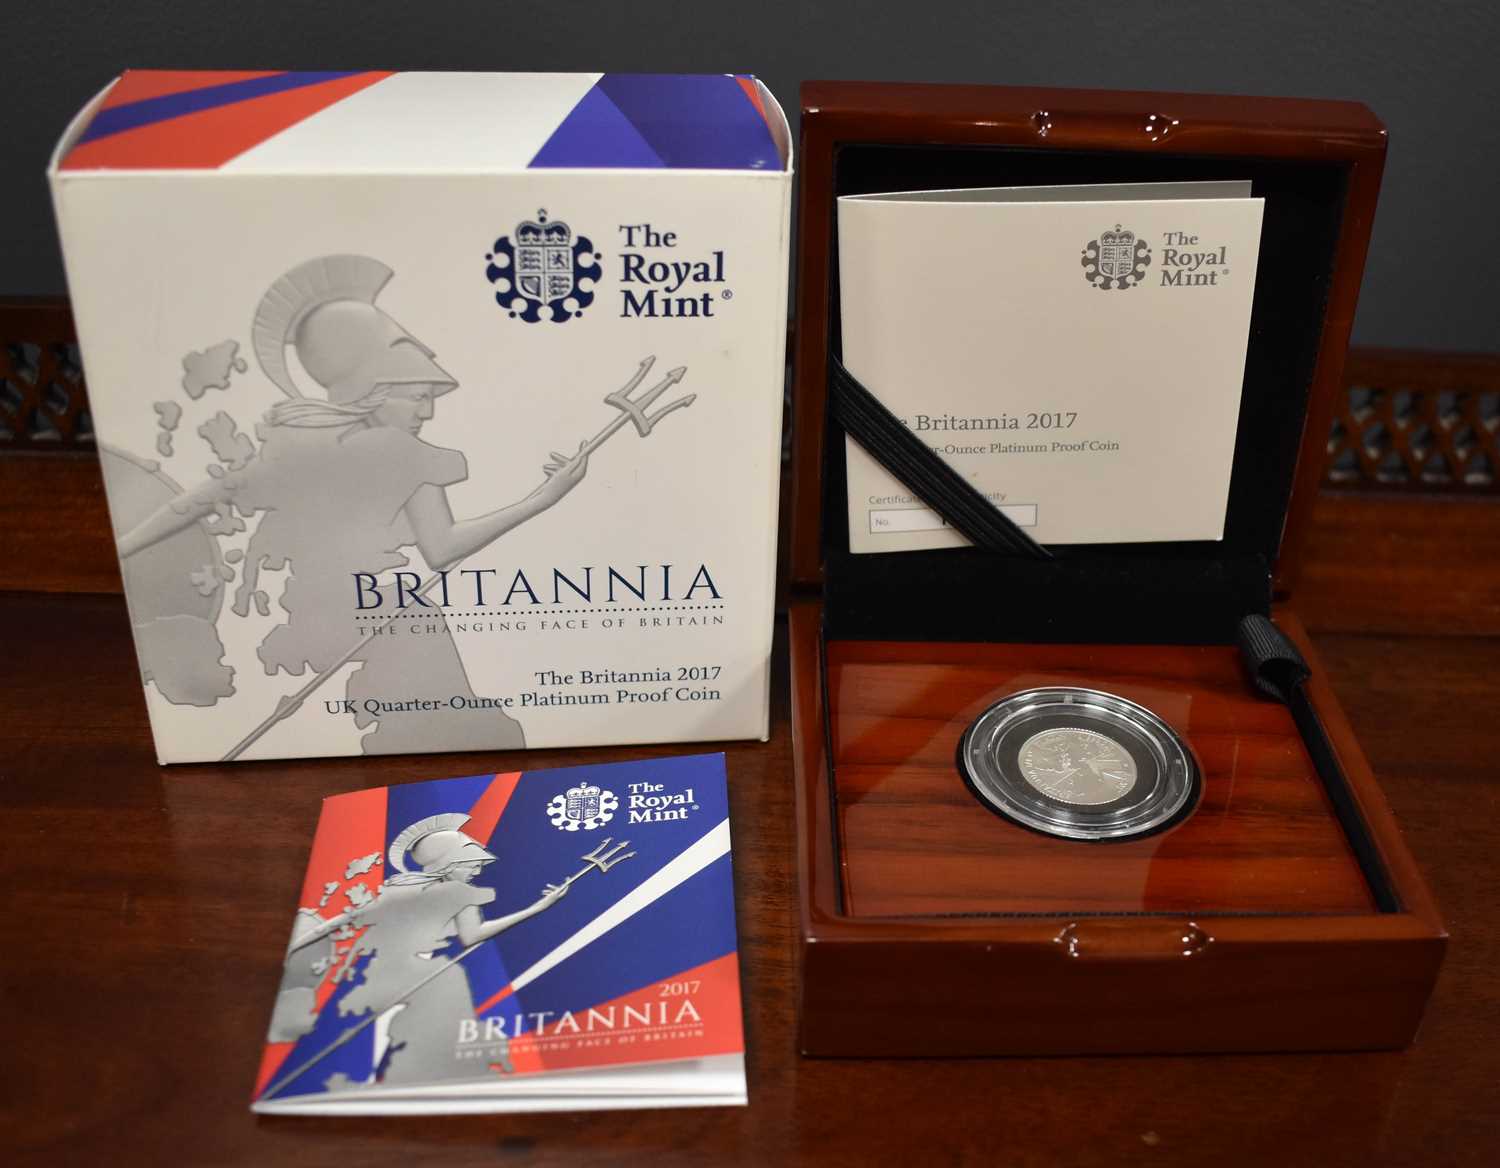 A Royal Mint Britannia 2017 UK Quarter-Ounce Platinum Proof Coin, with certificate of